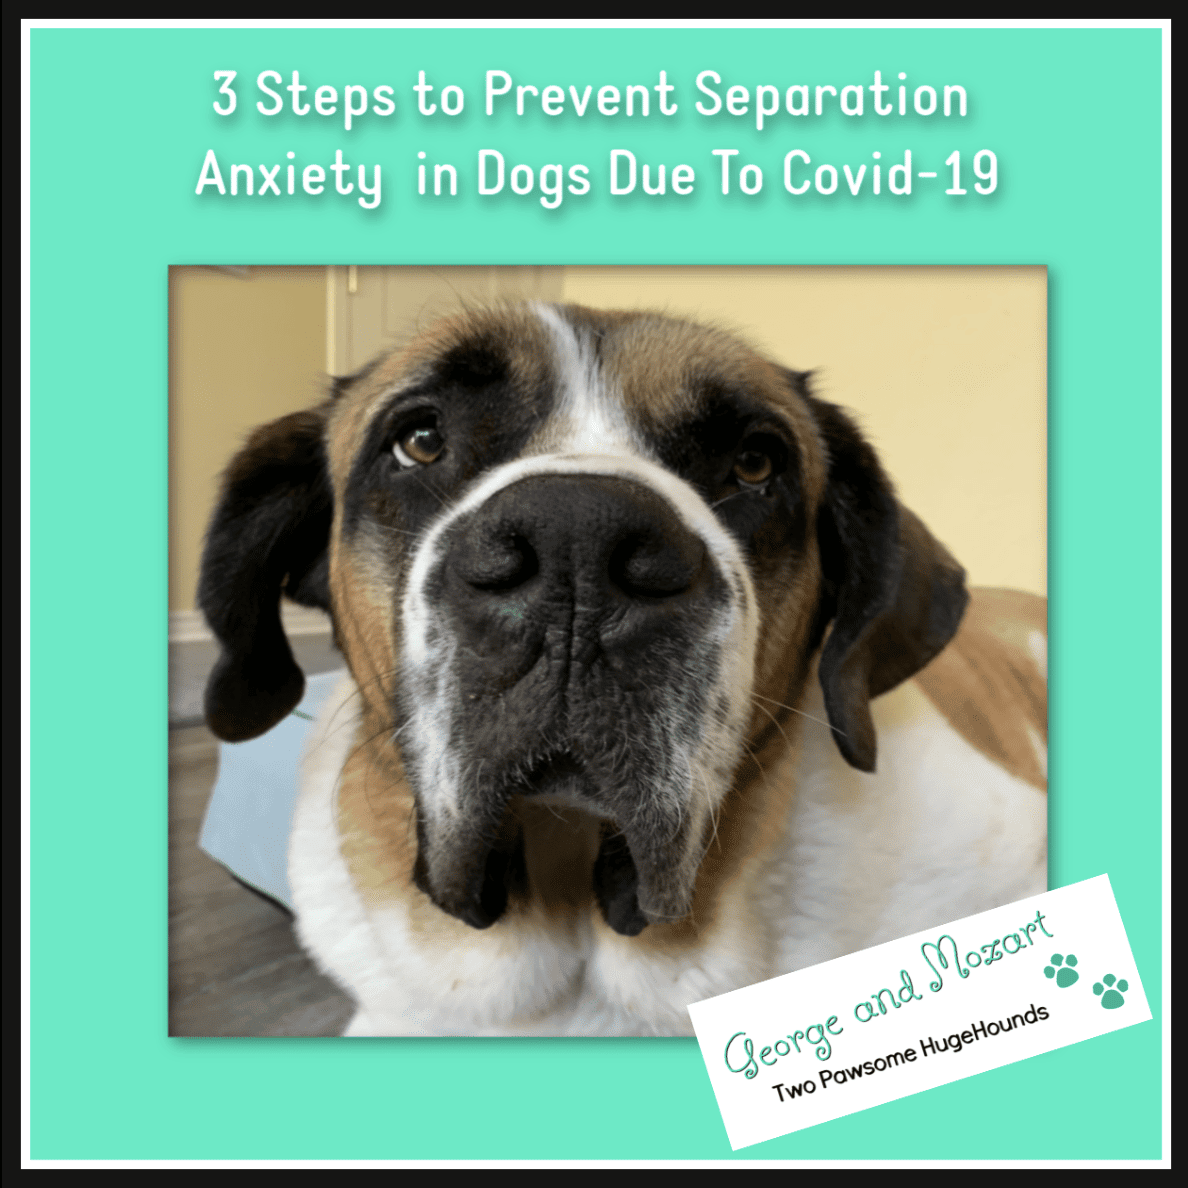 3 Steps to Prevent Separation Anxiety in Dogs Due to Covid